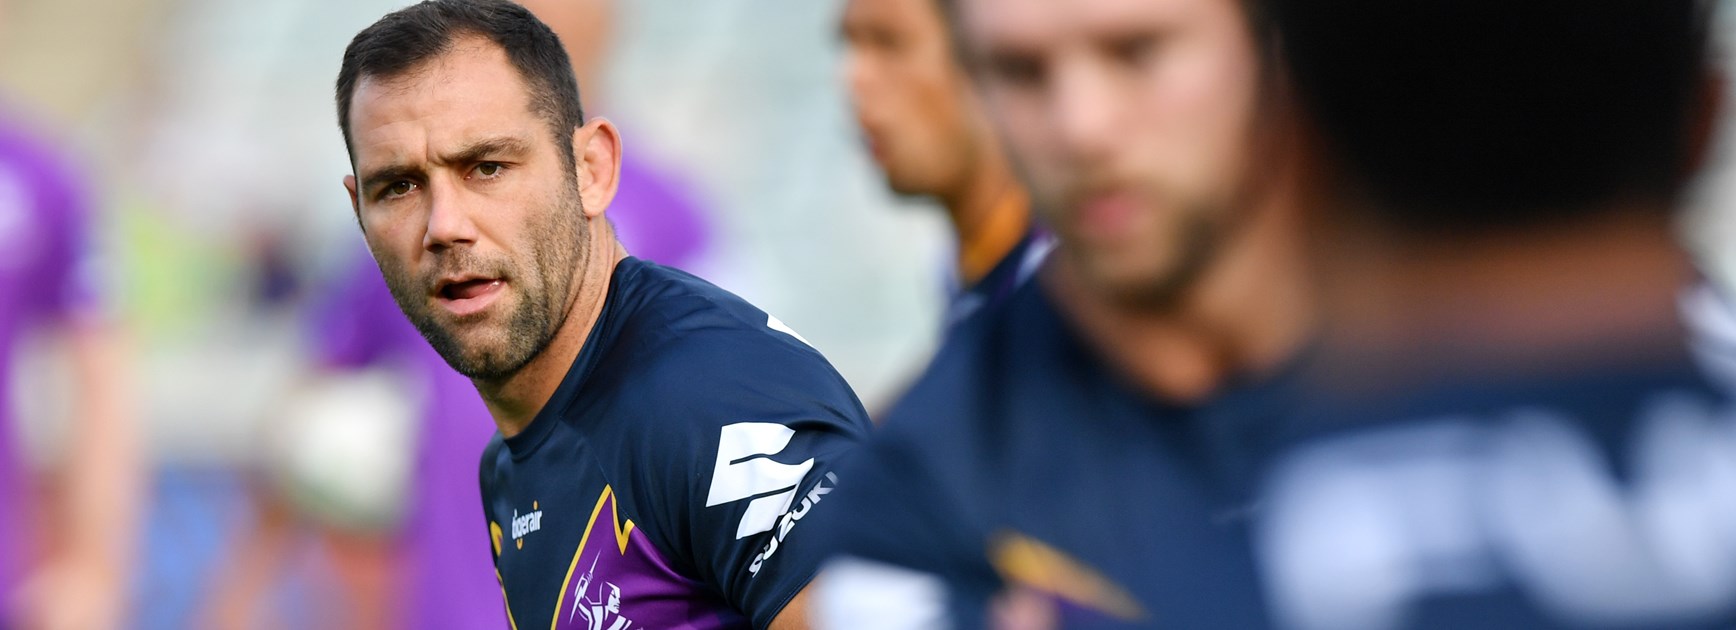 Smith confirms he'll suit up for Storm in 2020